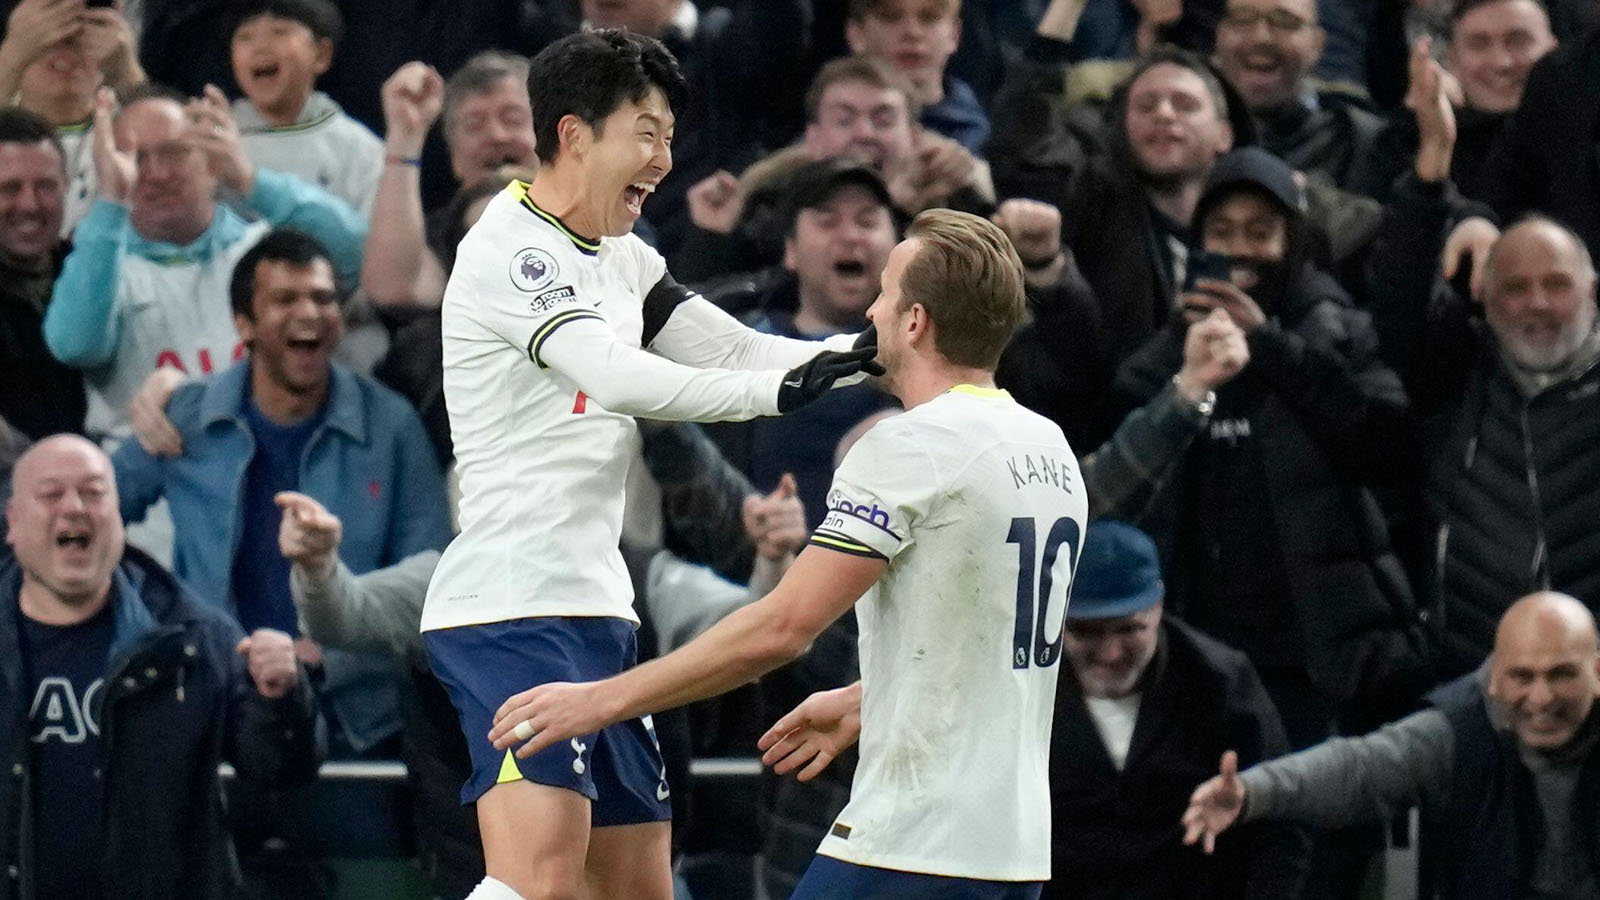 Tottenham's Son Heung-min, left, celebrates with Tottenham's Harry Kane after scoring his side's second goal during the English Premier League soccer match between Tottenham Hotspur and West Ham United at Tottenham Hotspur stadium in London